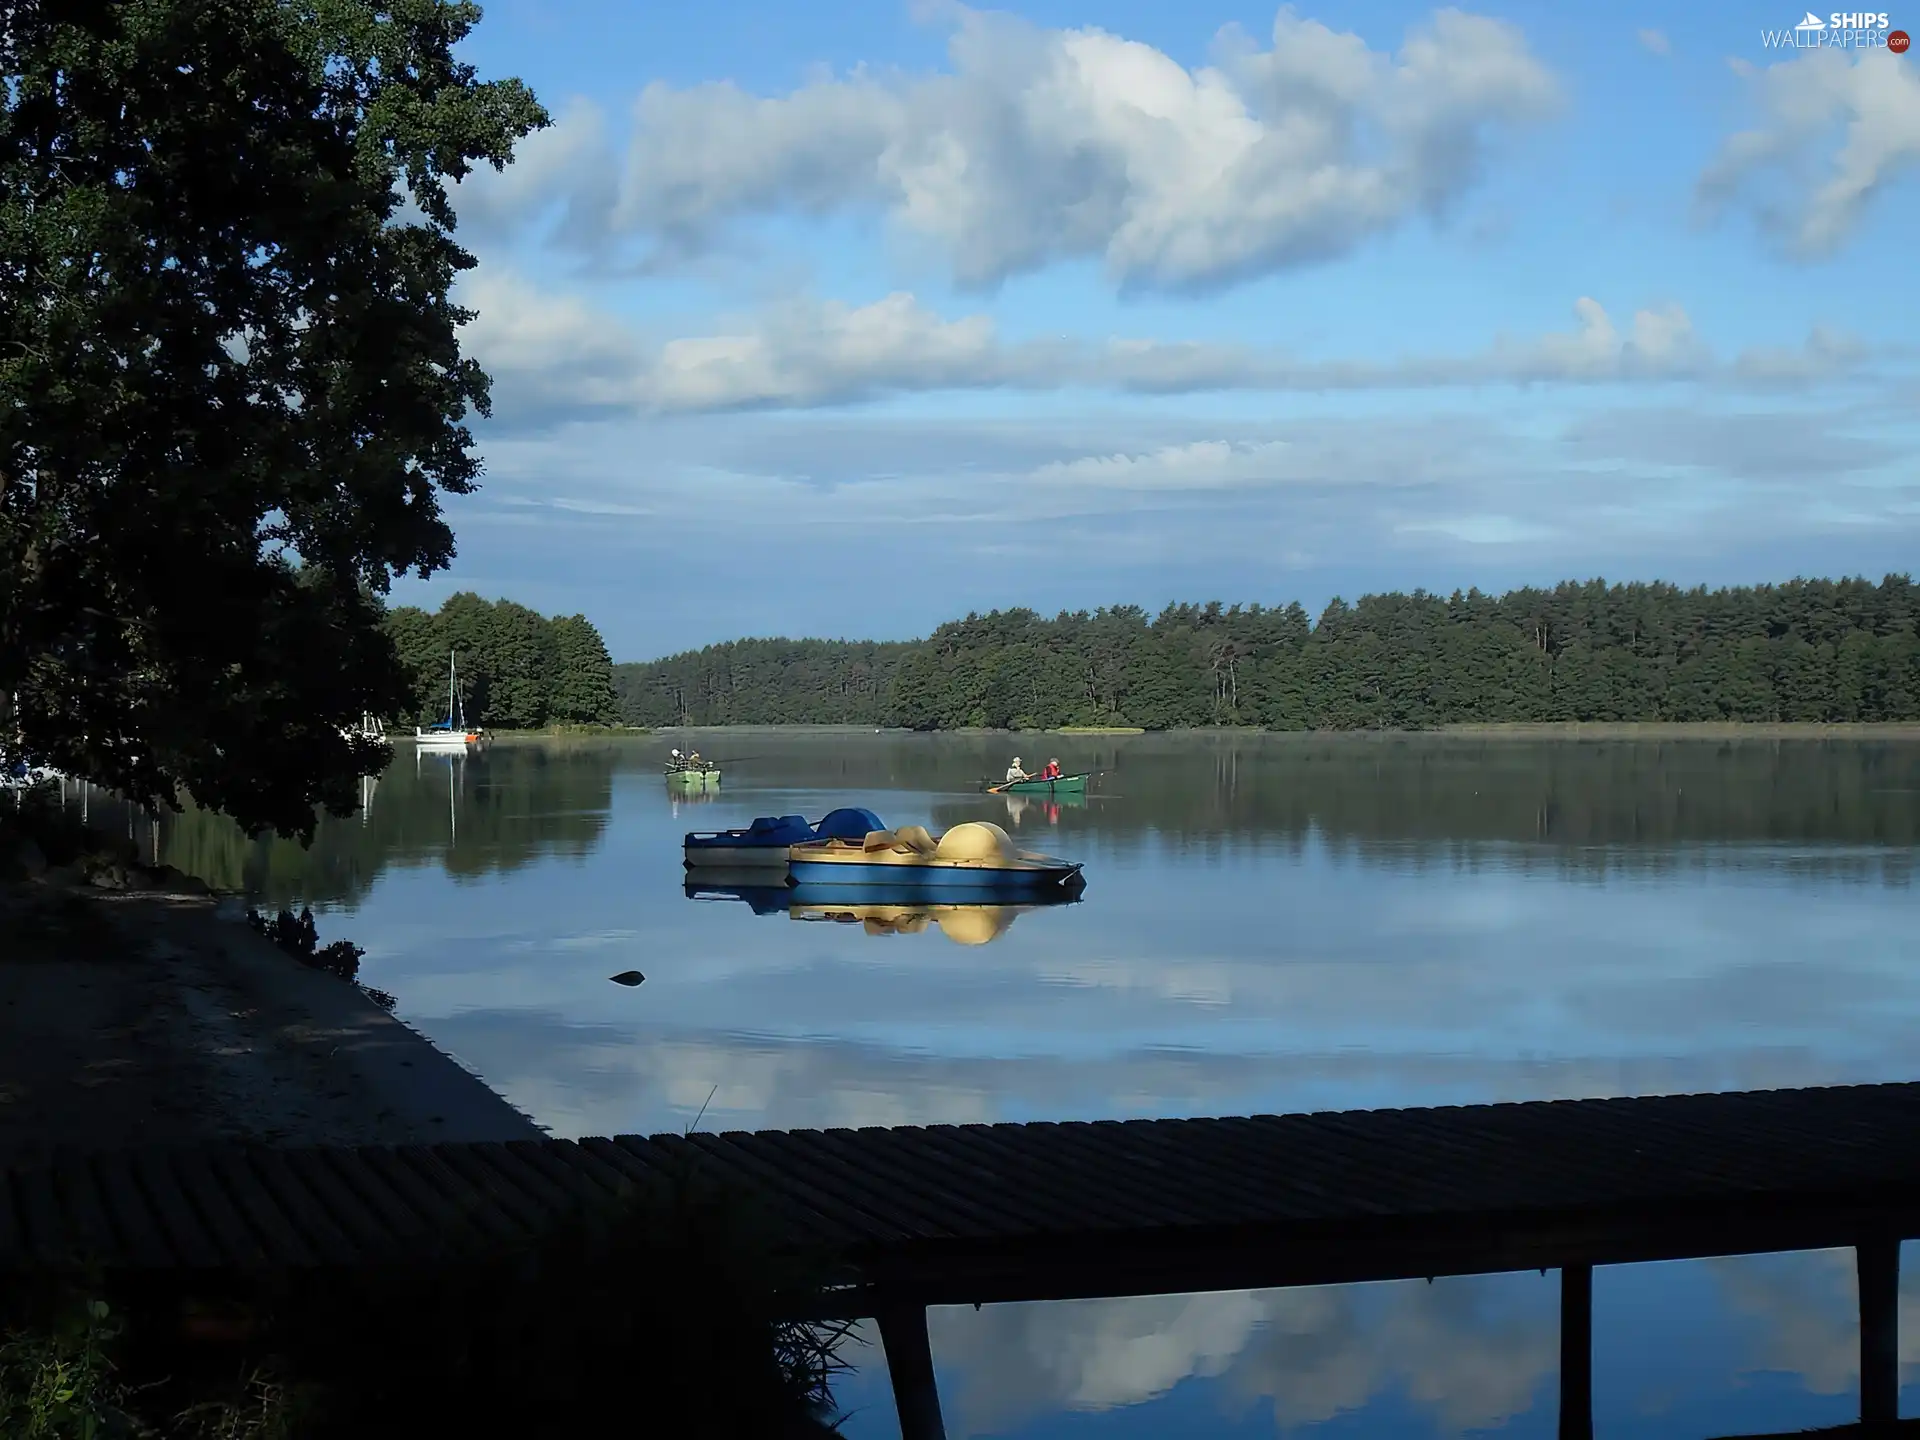 forest, Anglers, viewes, boats, lake, trees, clouds